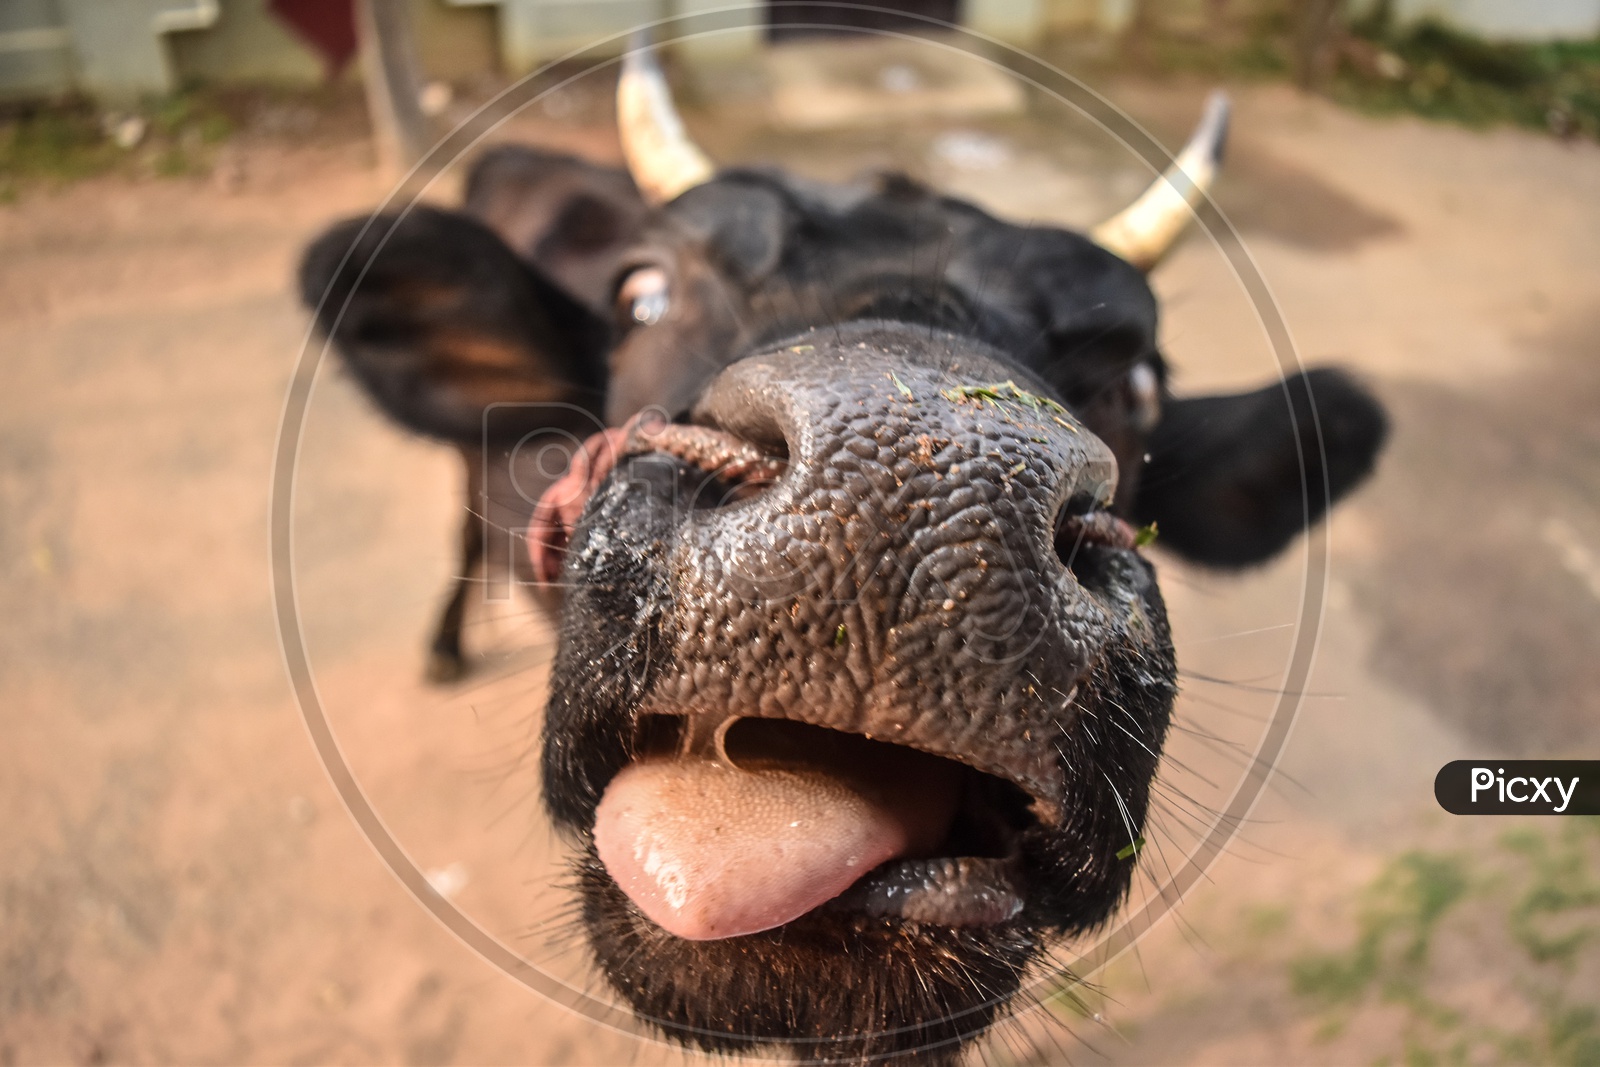 When cow strikes a pose for selfie!